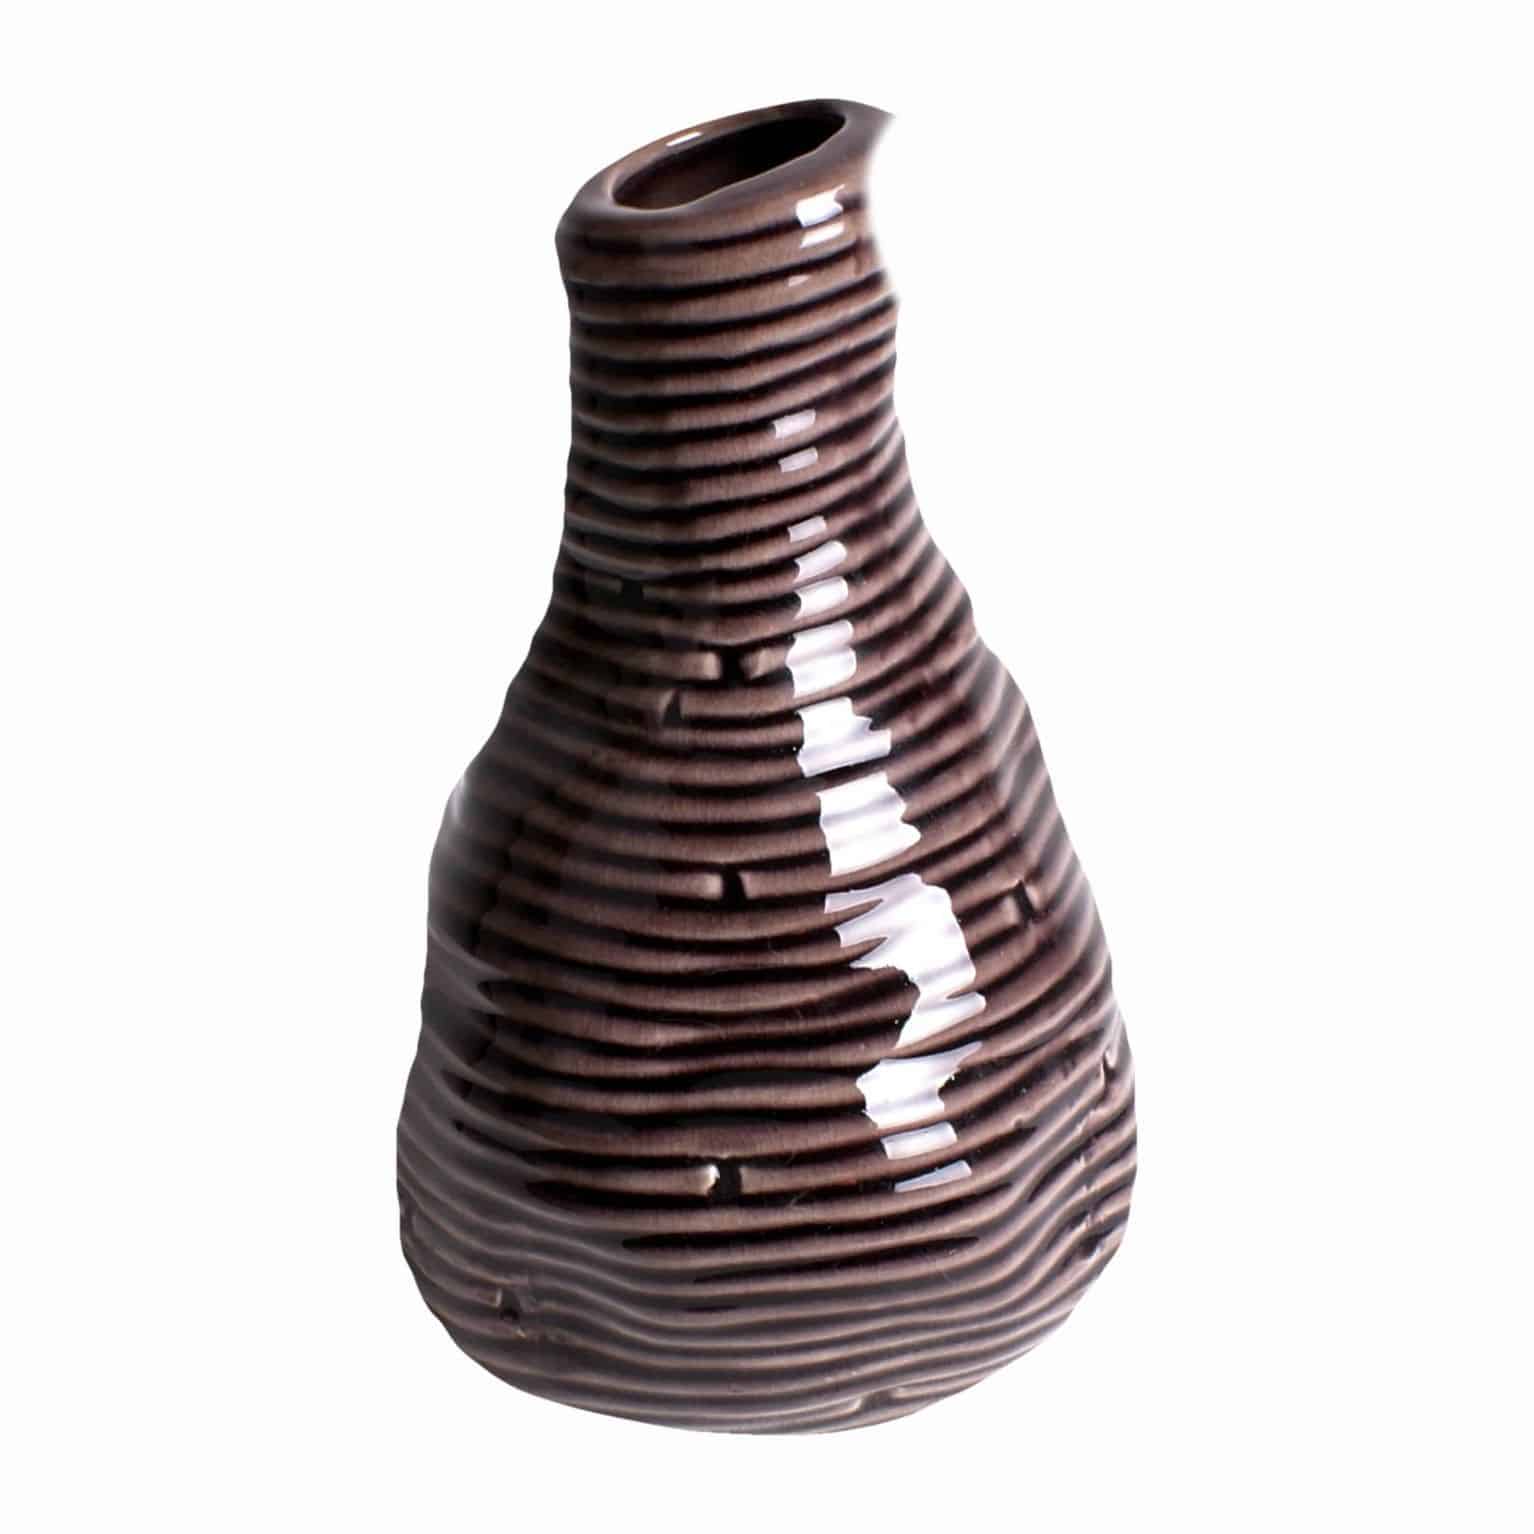 Shop for our handmade glazed vase. A distinctive aubergine colour and natural unevenness